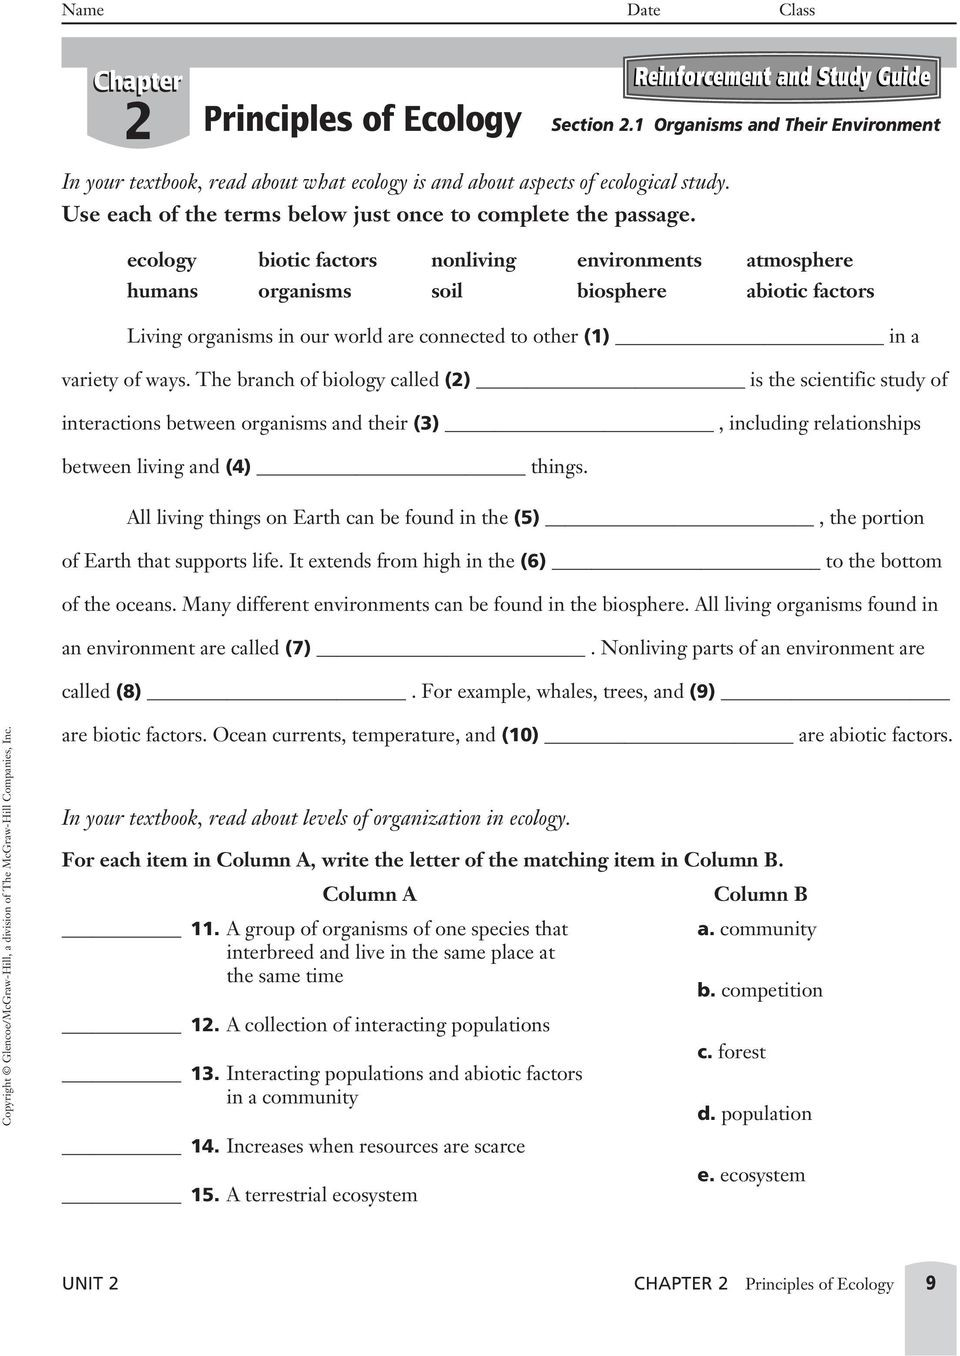 Principles Of Ecology Worksheet Answers Principles Ecology Section 22 Worksheet Answers